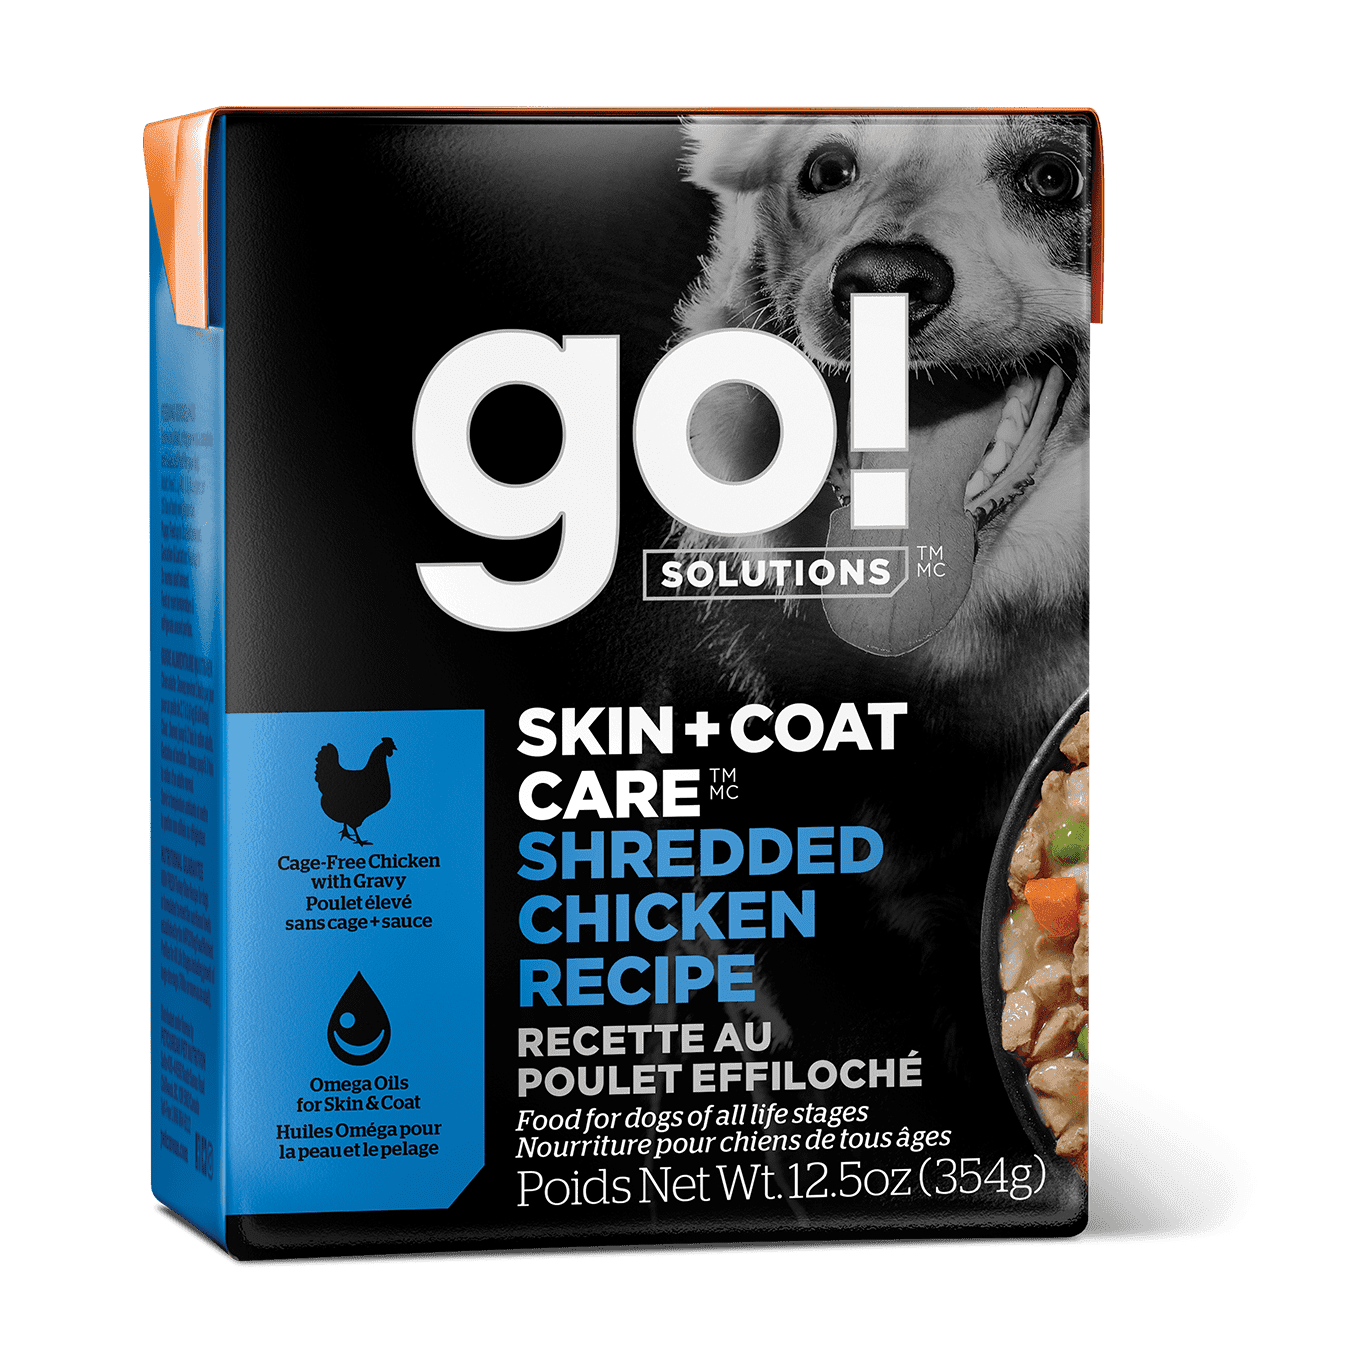 Your Whole Dog's GO! SOLUTIONS SKIN + COAT CARE Shredded Chicken (354g) is a premium pet food that enhances your dog's skin and coat health. This specially formulated recipe is made with high-quality ingredients to promote a shiny and healthy coat.